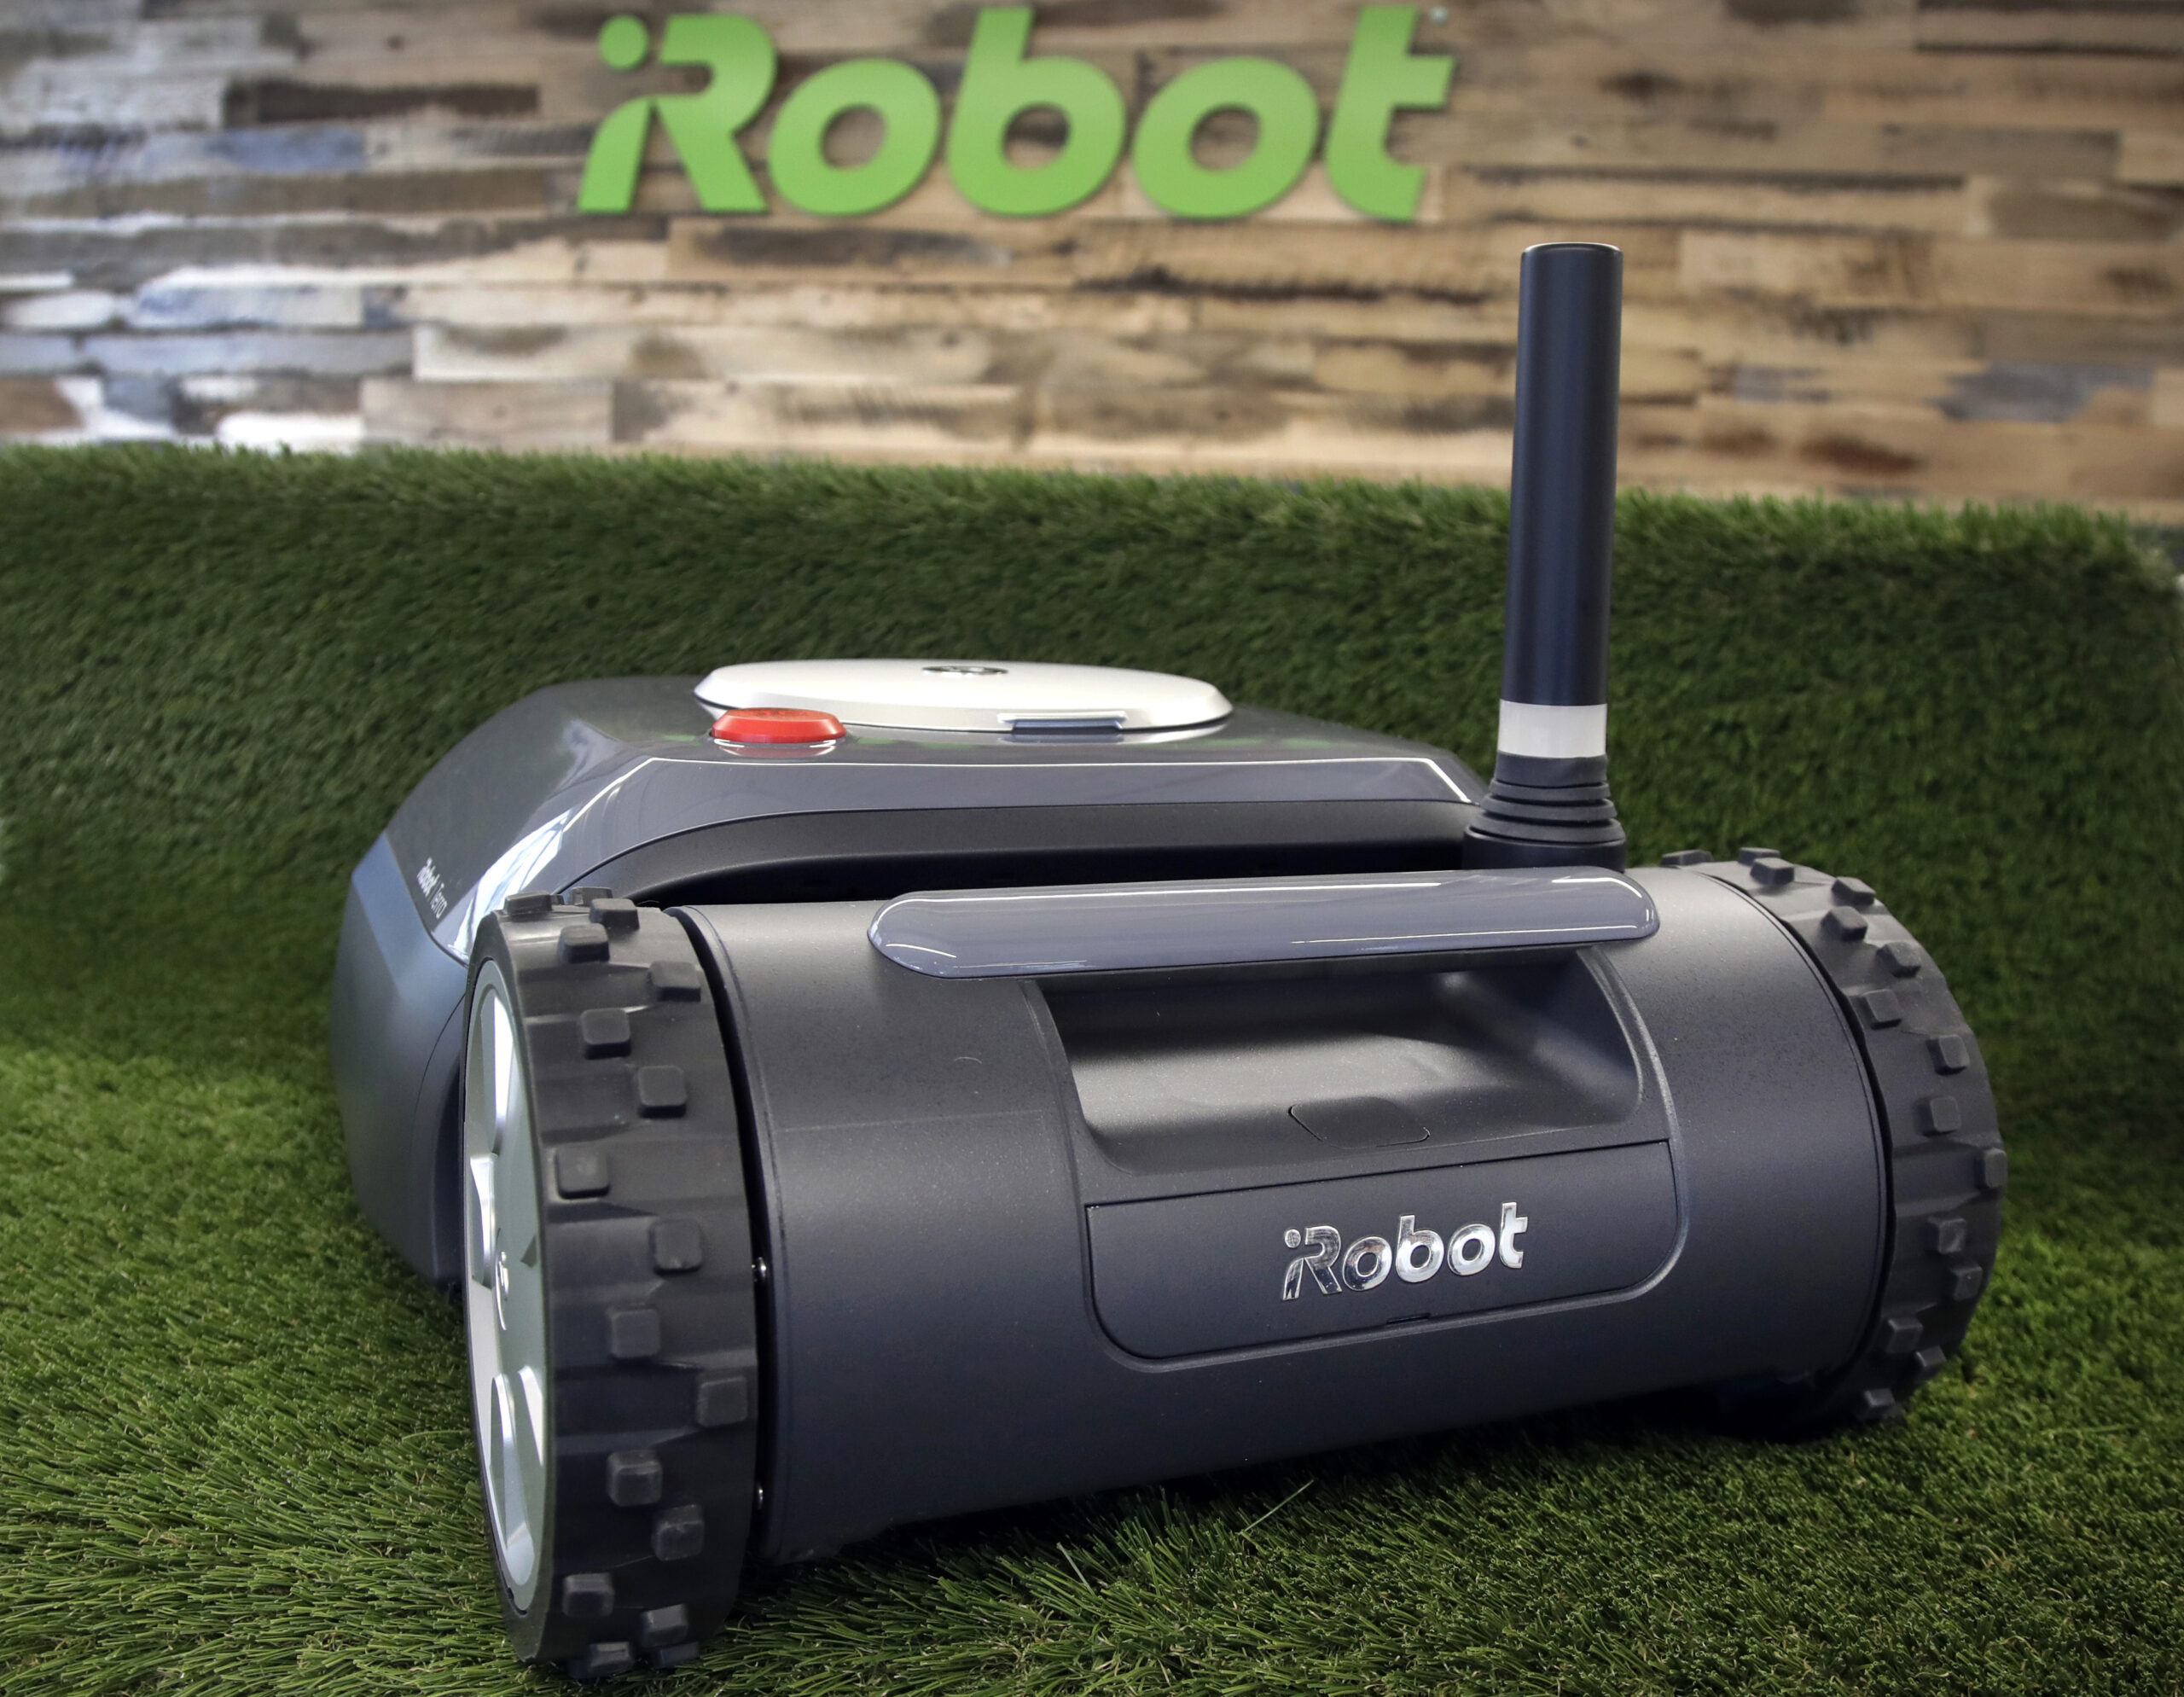 FILE - This Wednesday, Jan. 16, 2019 file photo shows an iRobot Terra lawn mower in Bedford, Mass. Amazon on Friday, Aug. 5, 2022, announced it has entered into an agreement to acquire the iRobot for approximately $1.66 billion. The company sells its robots worldwide and is most famous for the circular-shaped Roomba vacuum. (AP Photo/Elise Amendola, File)